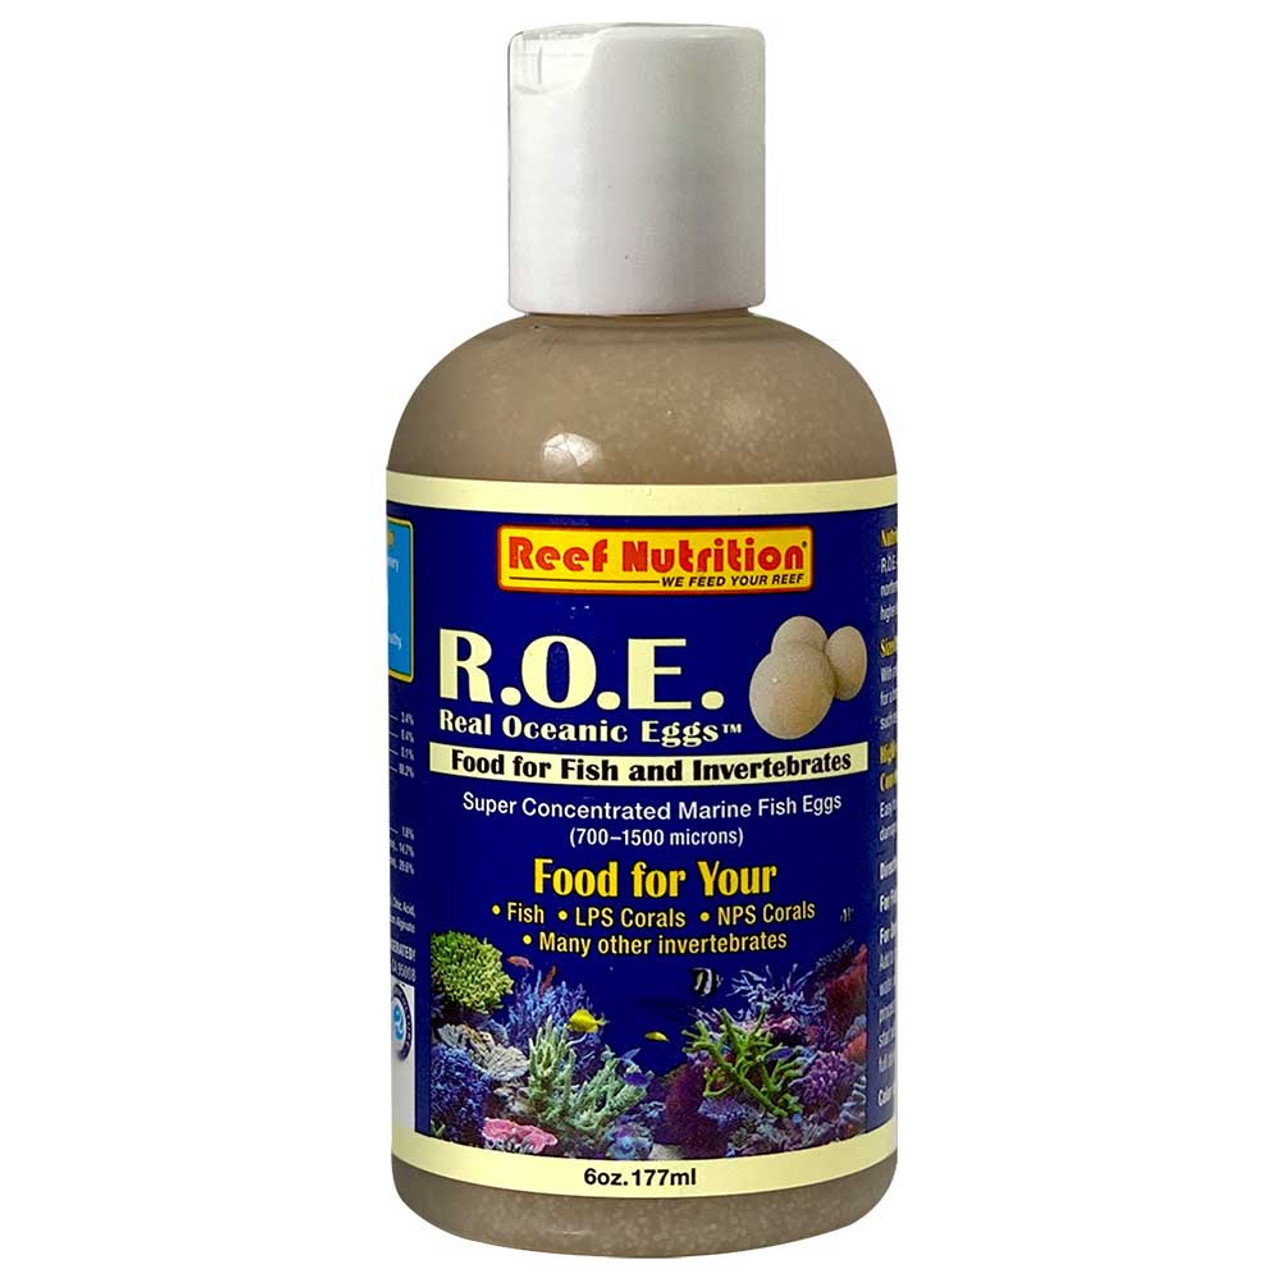 ROE - Real Oceanic Fish Eggs (6 oz) - Reef Nutrition